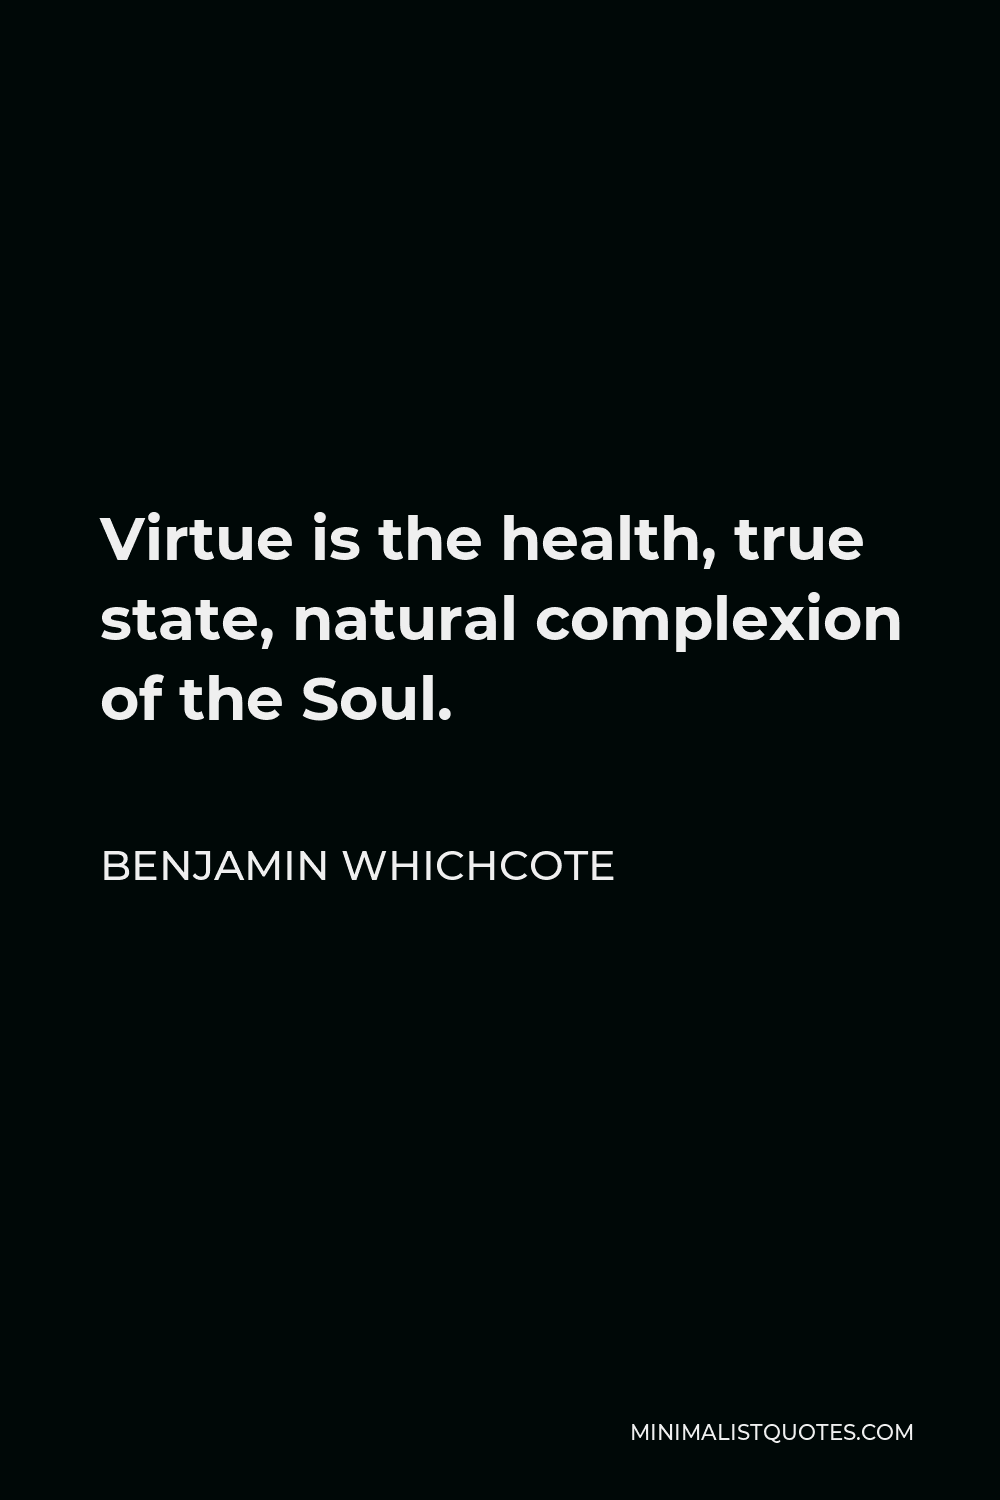 Benjamin Whichcote Quote - Virtue is the health, true state, natural complexion of the Soul.